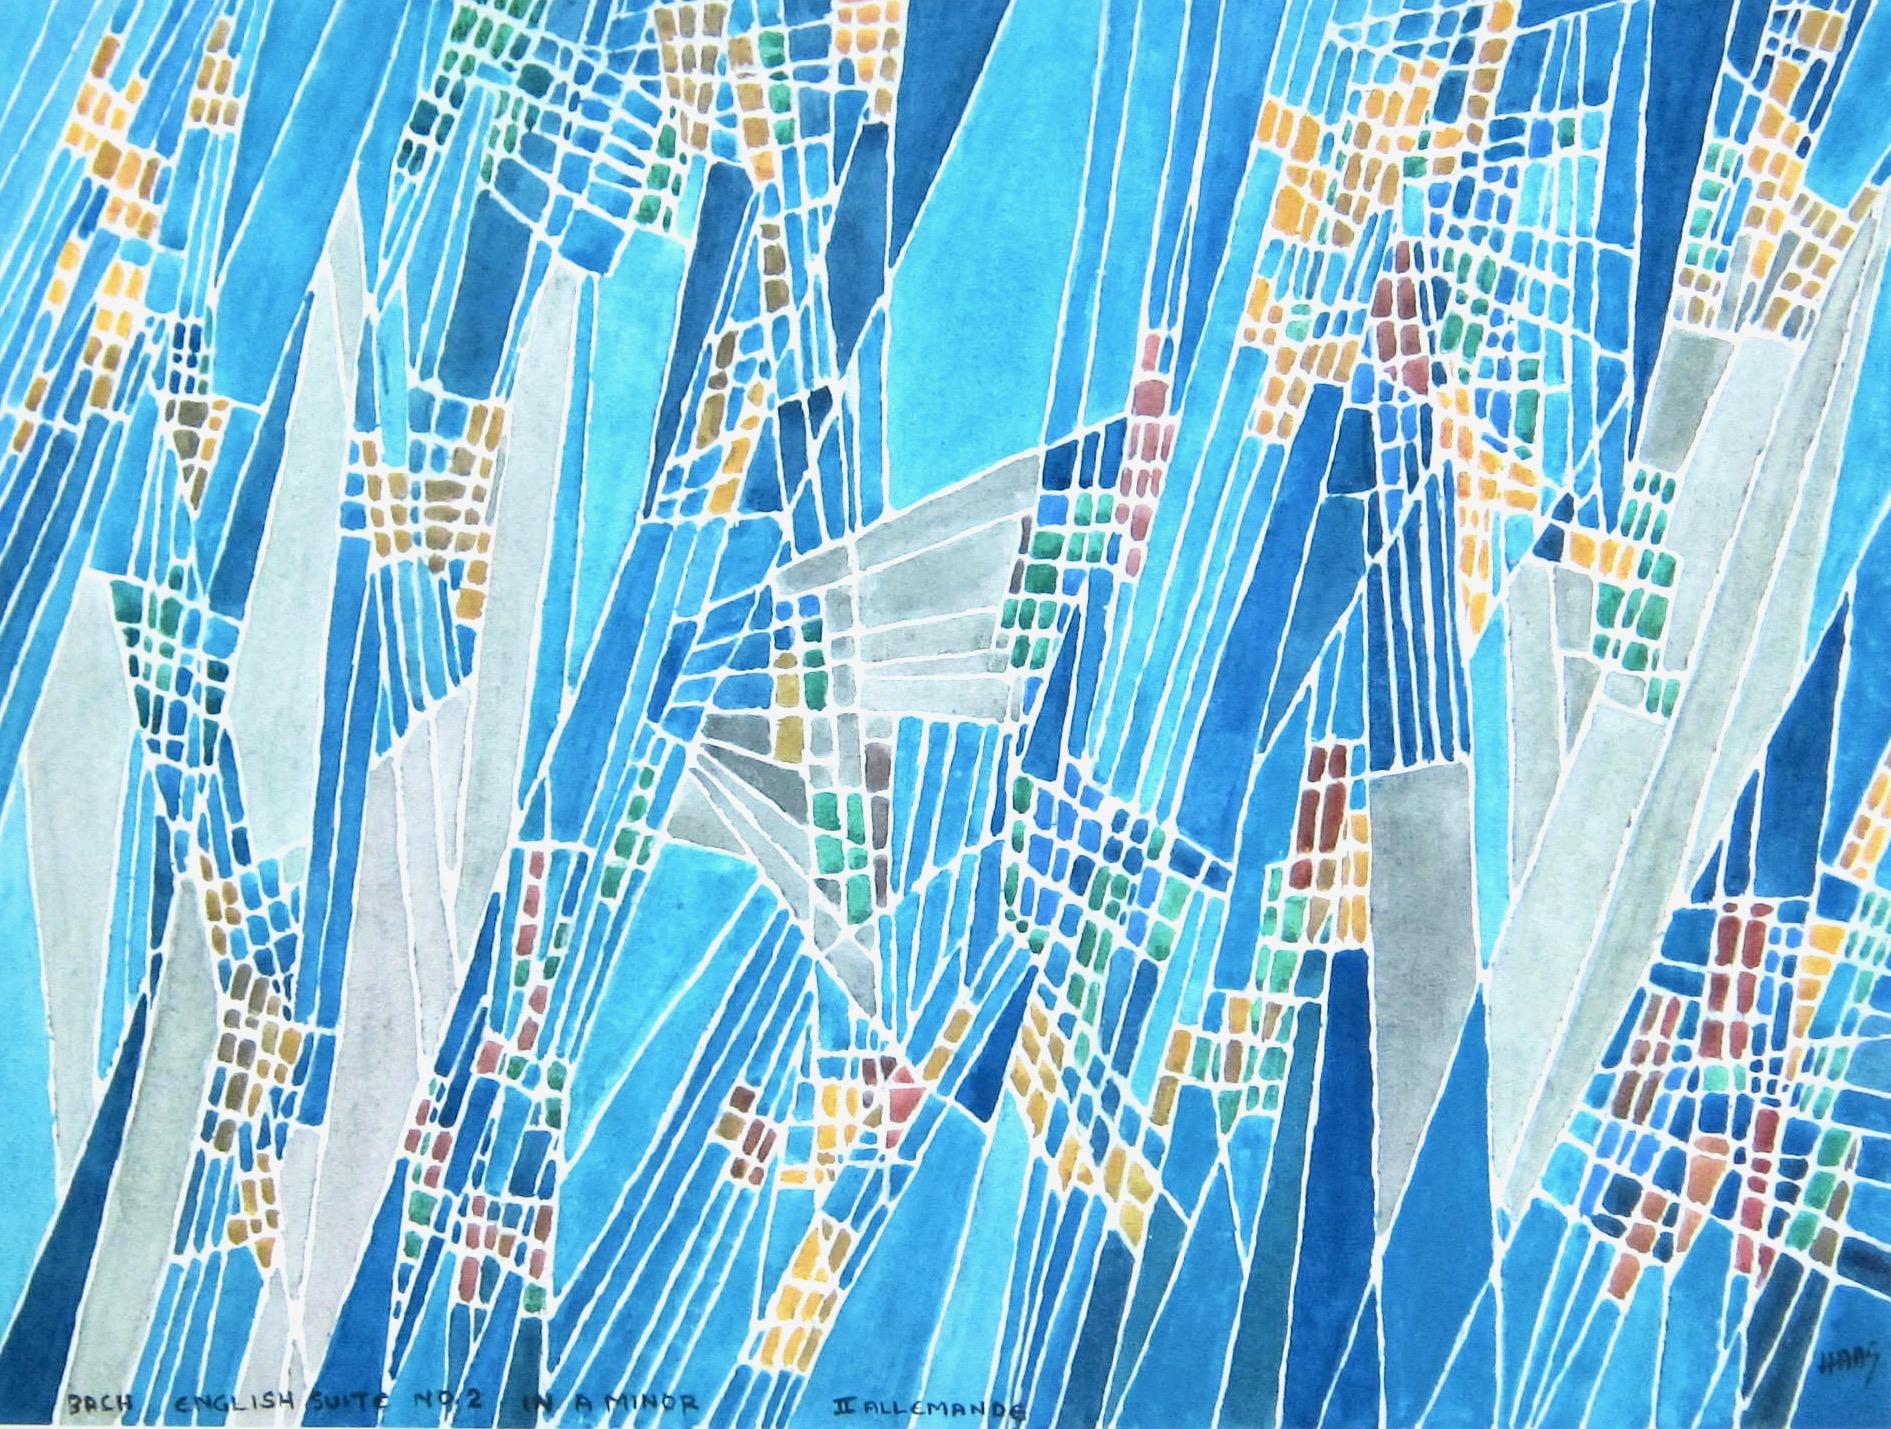 Non-objective abstract painting by San Francisco Bay Area artist Hildegarde Haas from her classical music series.
Title: 'Bach - English Suite No.2 in A Minor - II Allemande'
Medium: Watercolor on paper
Measurements:  11.75 inches x 15.75 inches